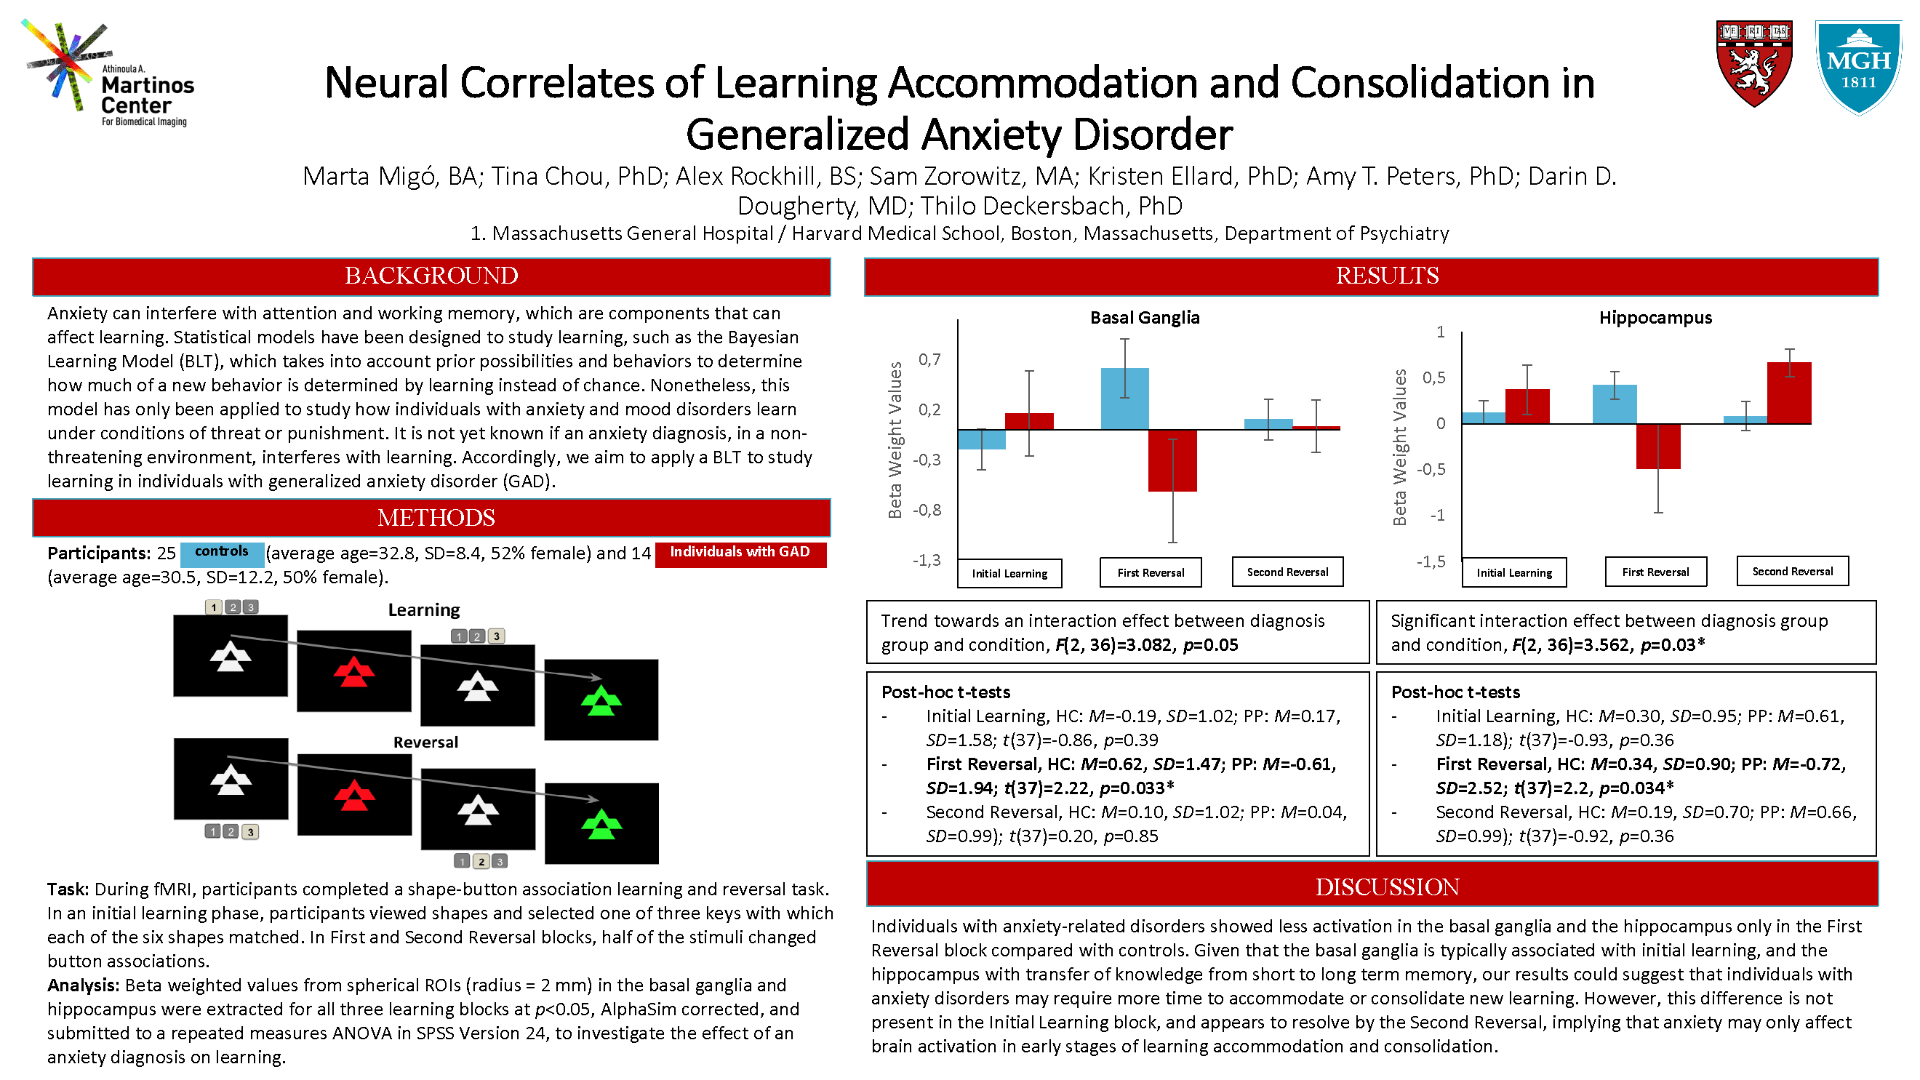 Neural Correlates of Learning Accommodation and Consolidation in Generalized Anxiety Disorder